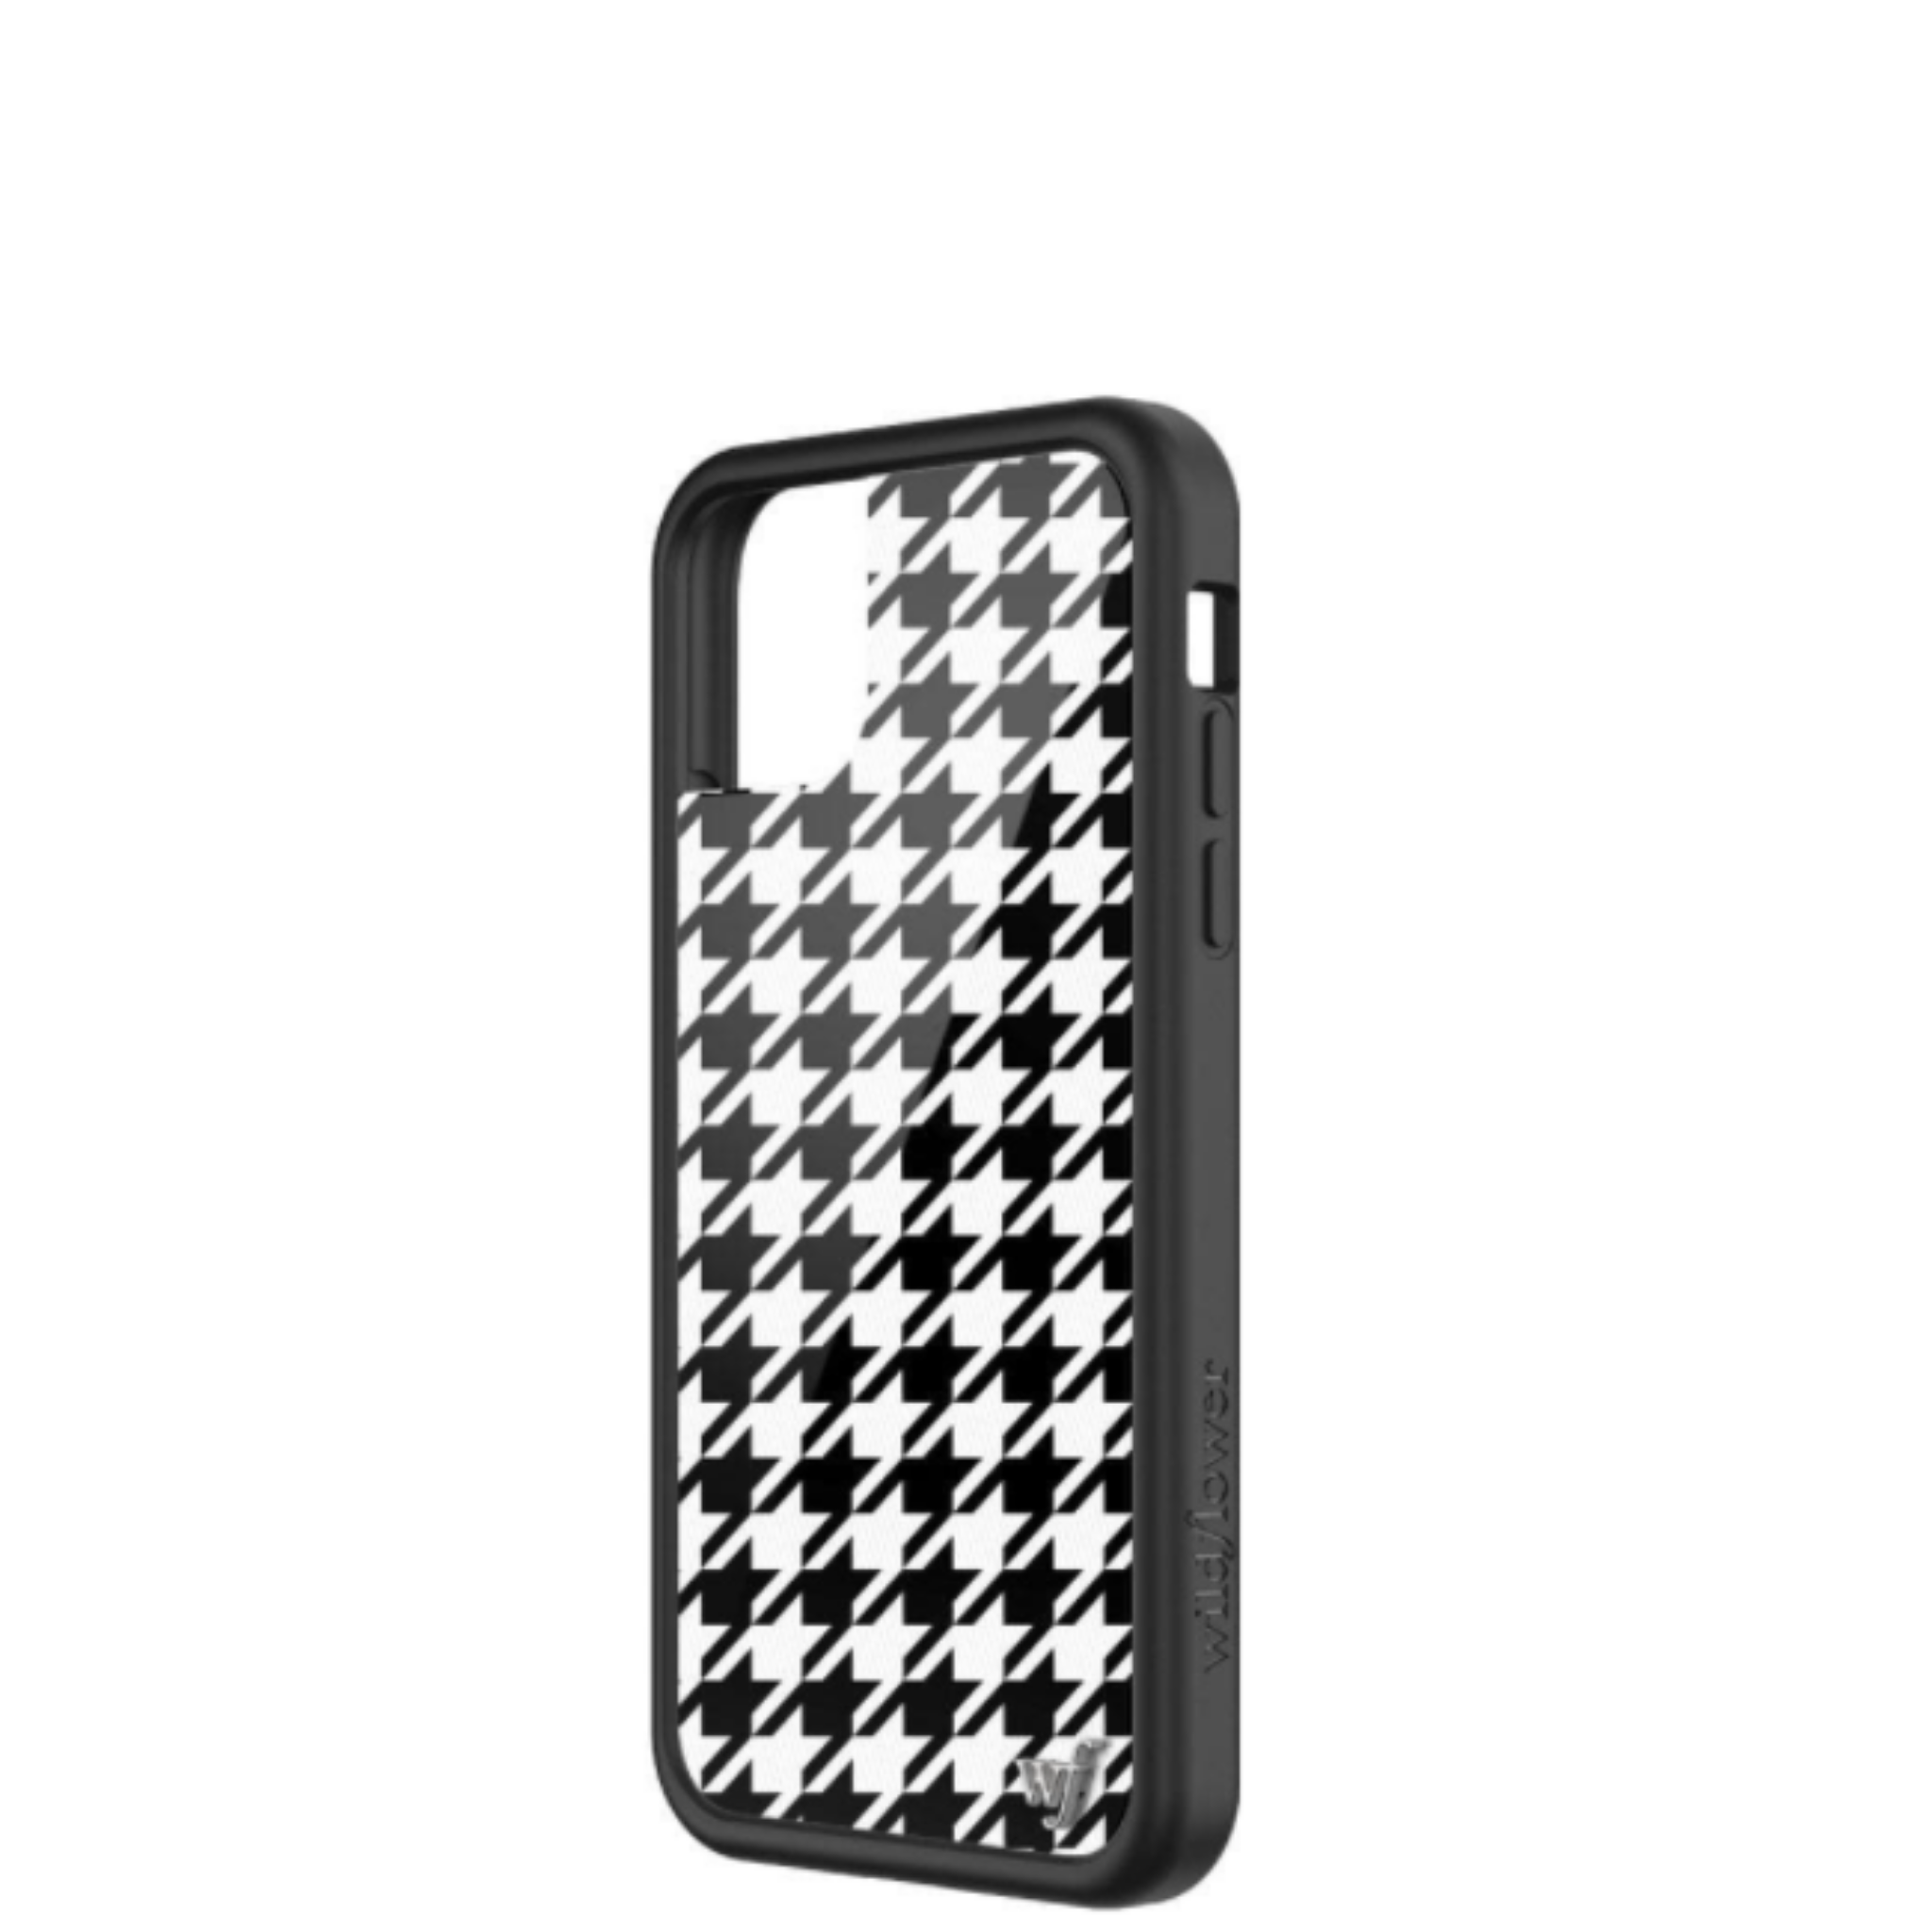 Houndstooth iPhone 11 Pro Max Case